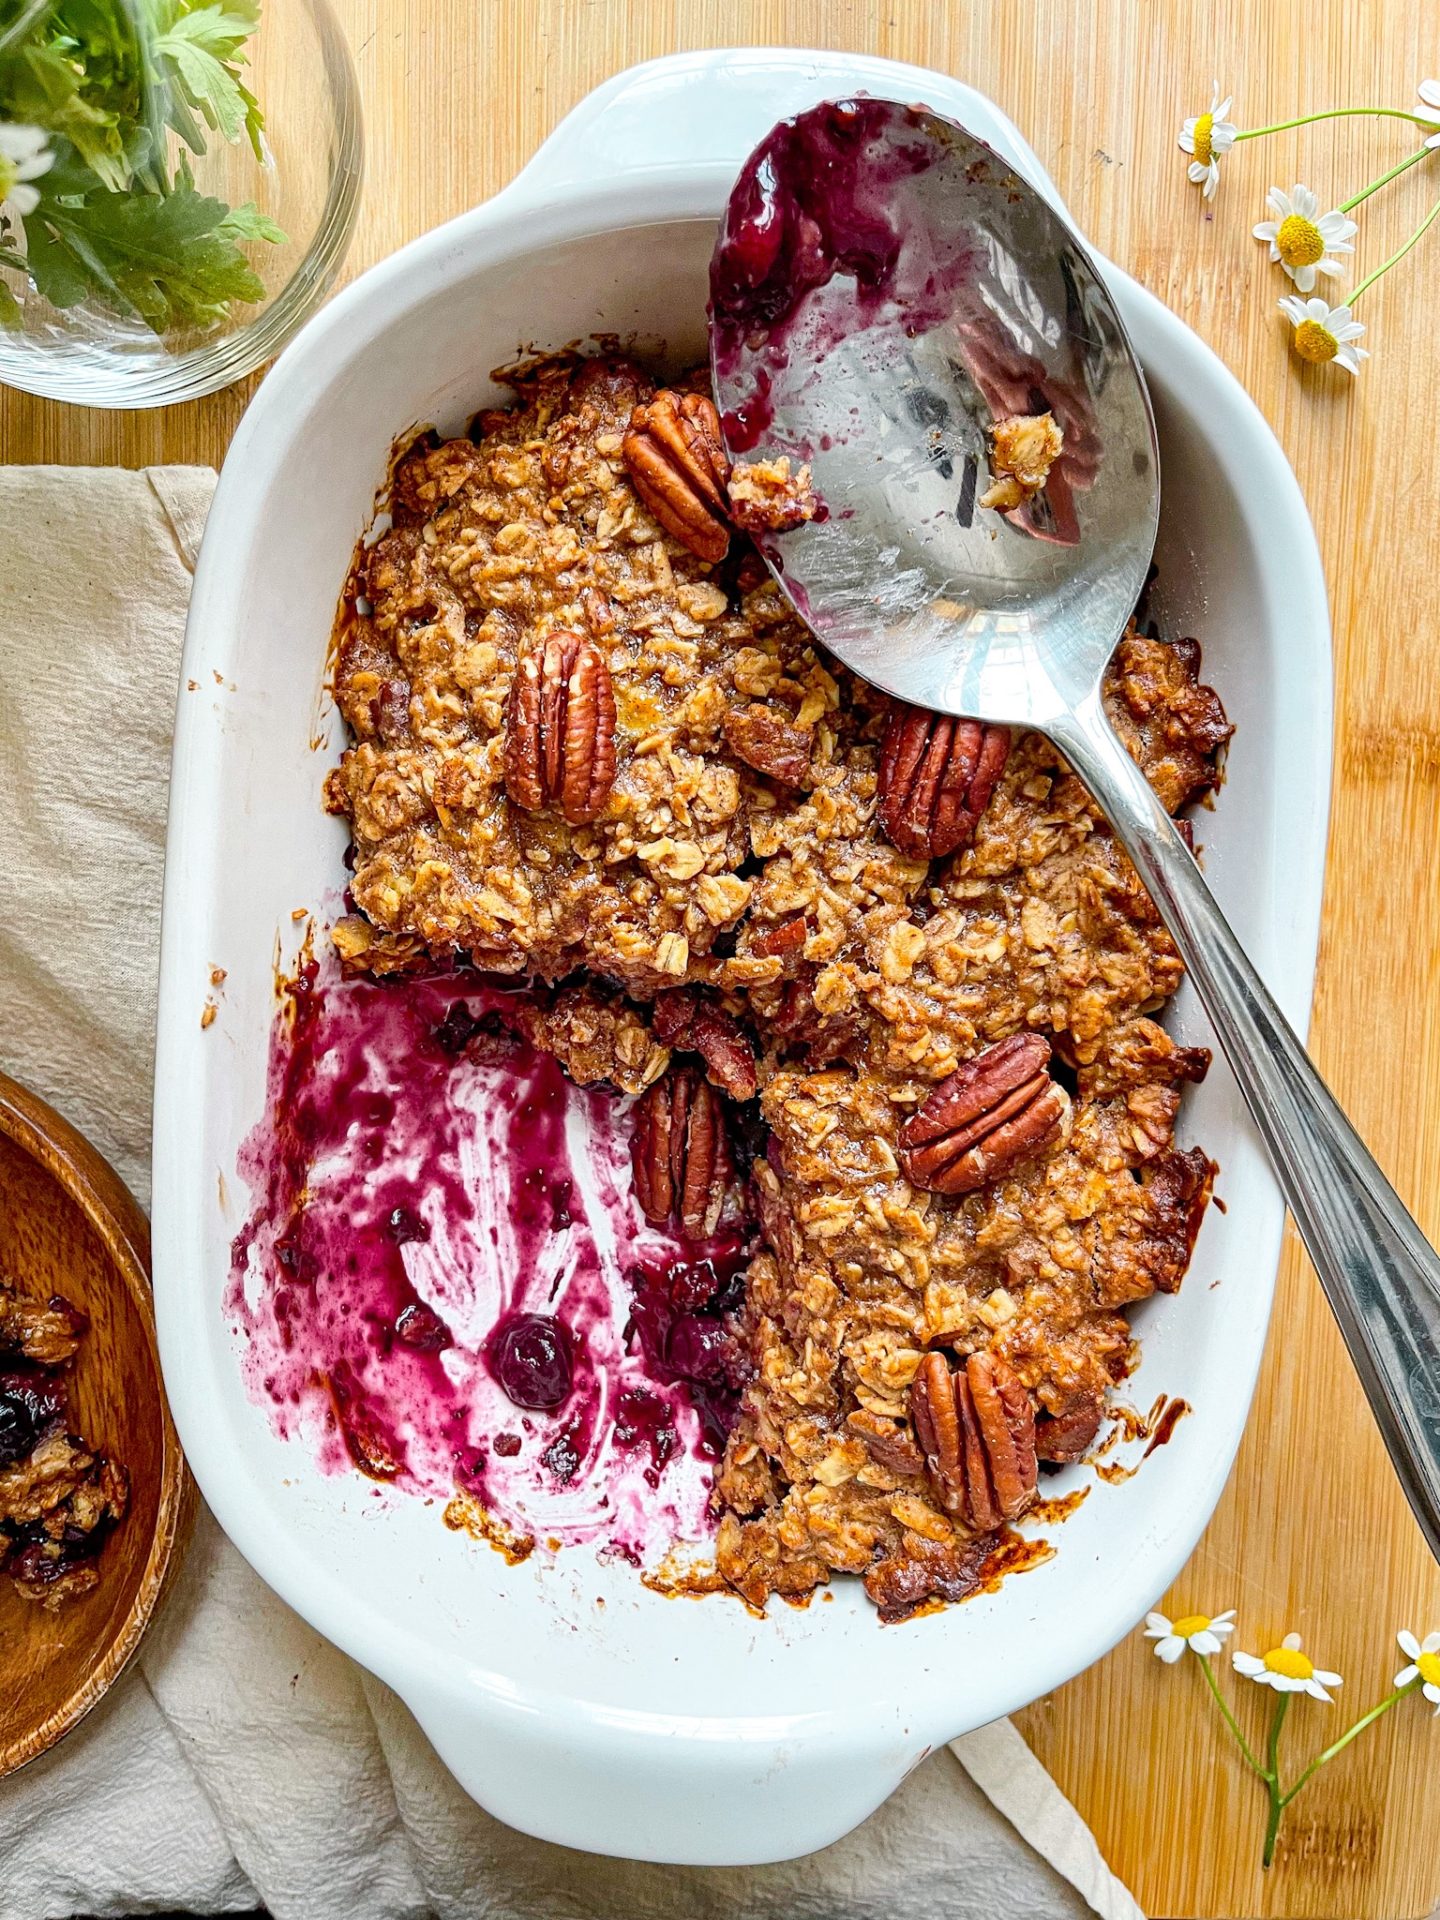 Blueberry Breakfast Crumble with Oil Free Cinnamon Oat Topping